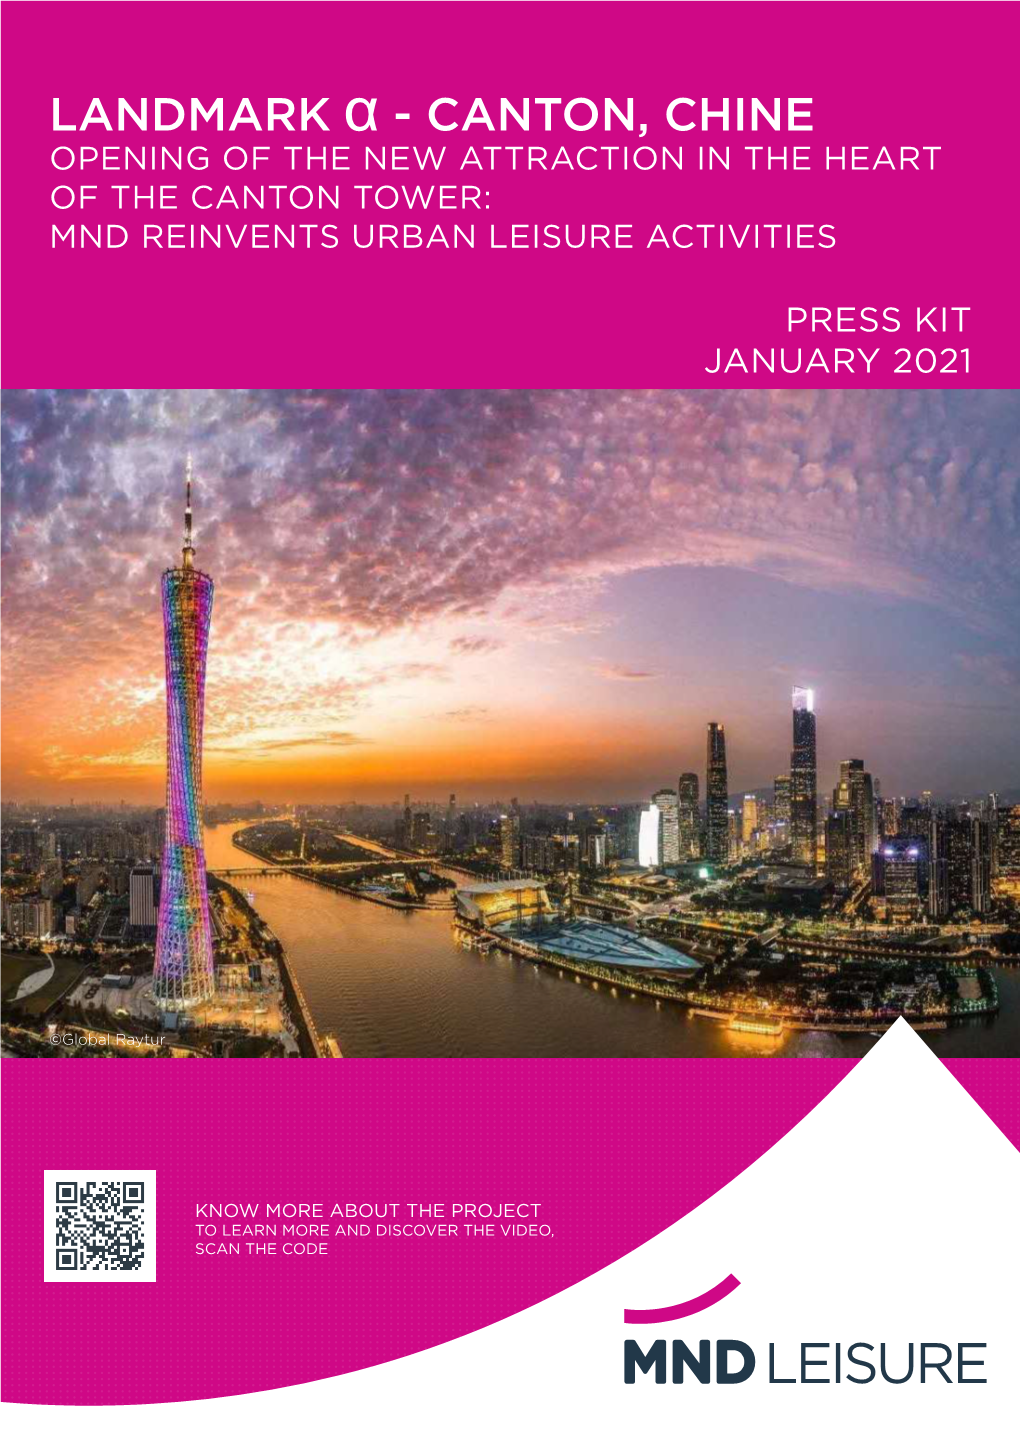 Landmark Α - Canton, Chine Opening of the New Attraction in the Heart of the Canton Tower: Mnd Reinvents Urban Leisure Activities